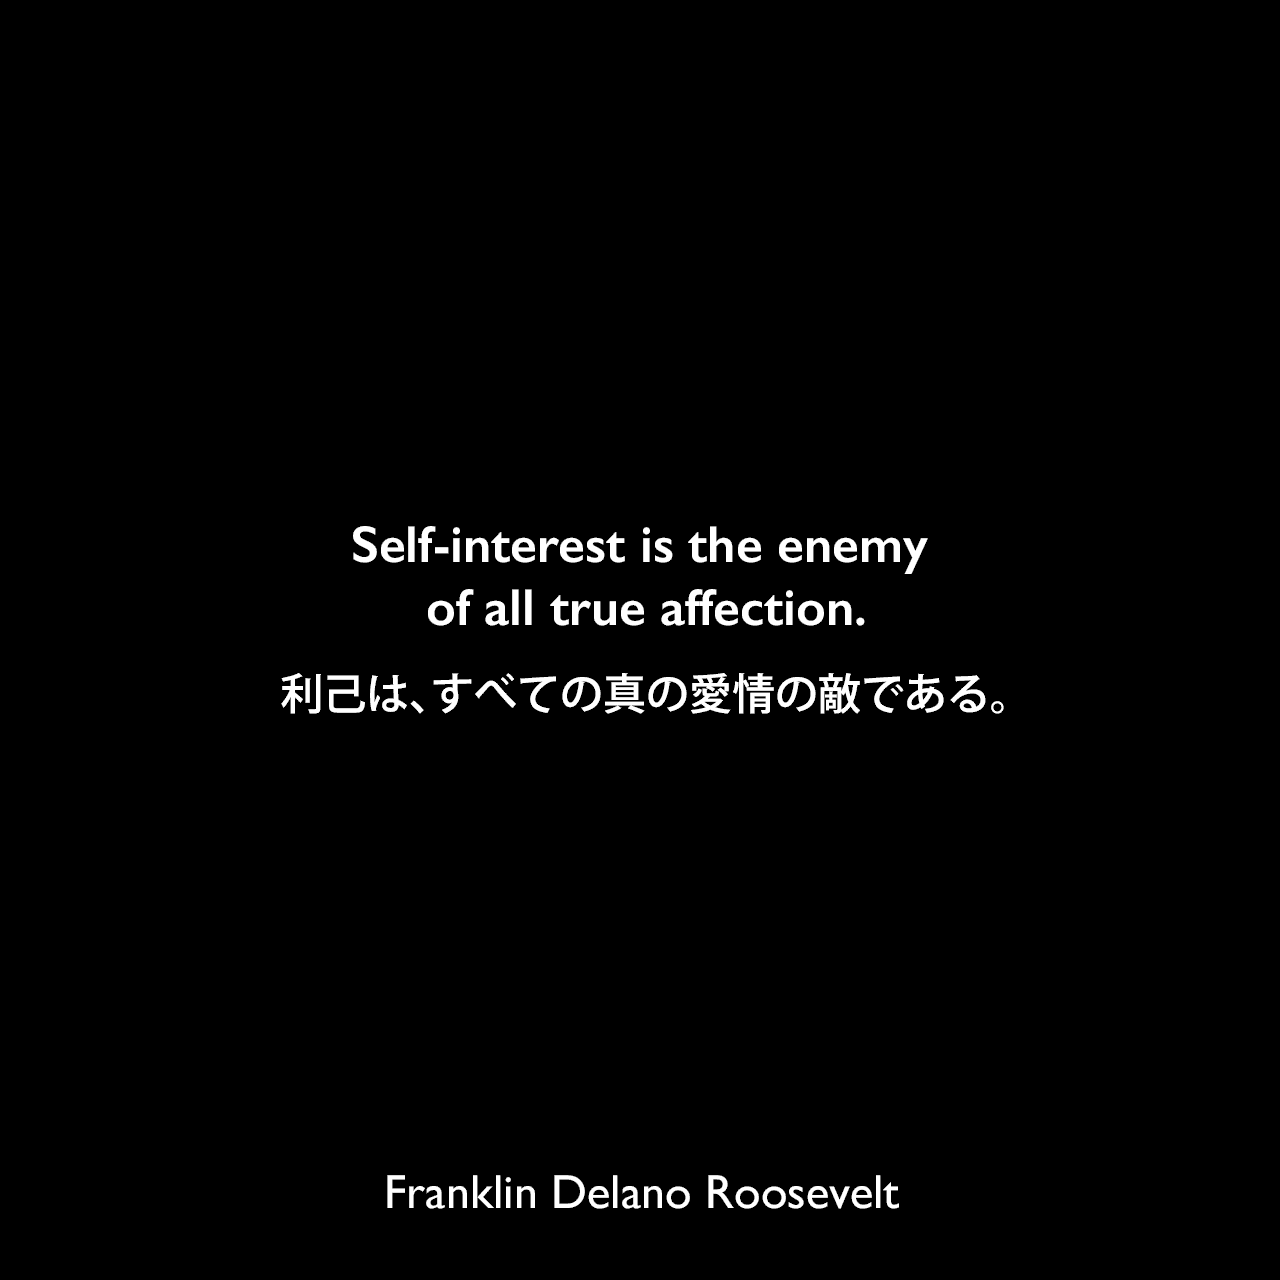 Self-interest is the enemy of all true affection.利己は、すべての真の愛情の敵である。Franklin Delano Roosevelt